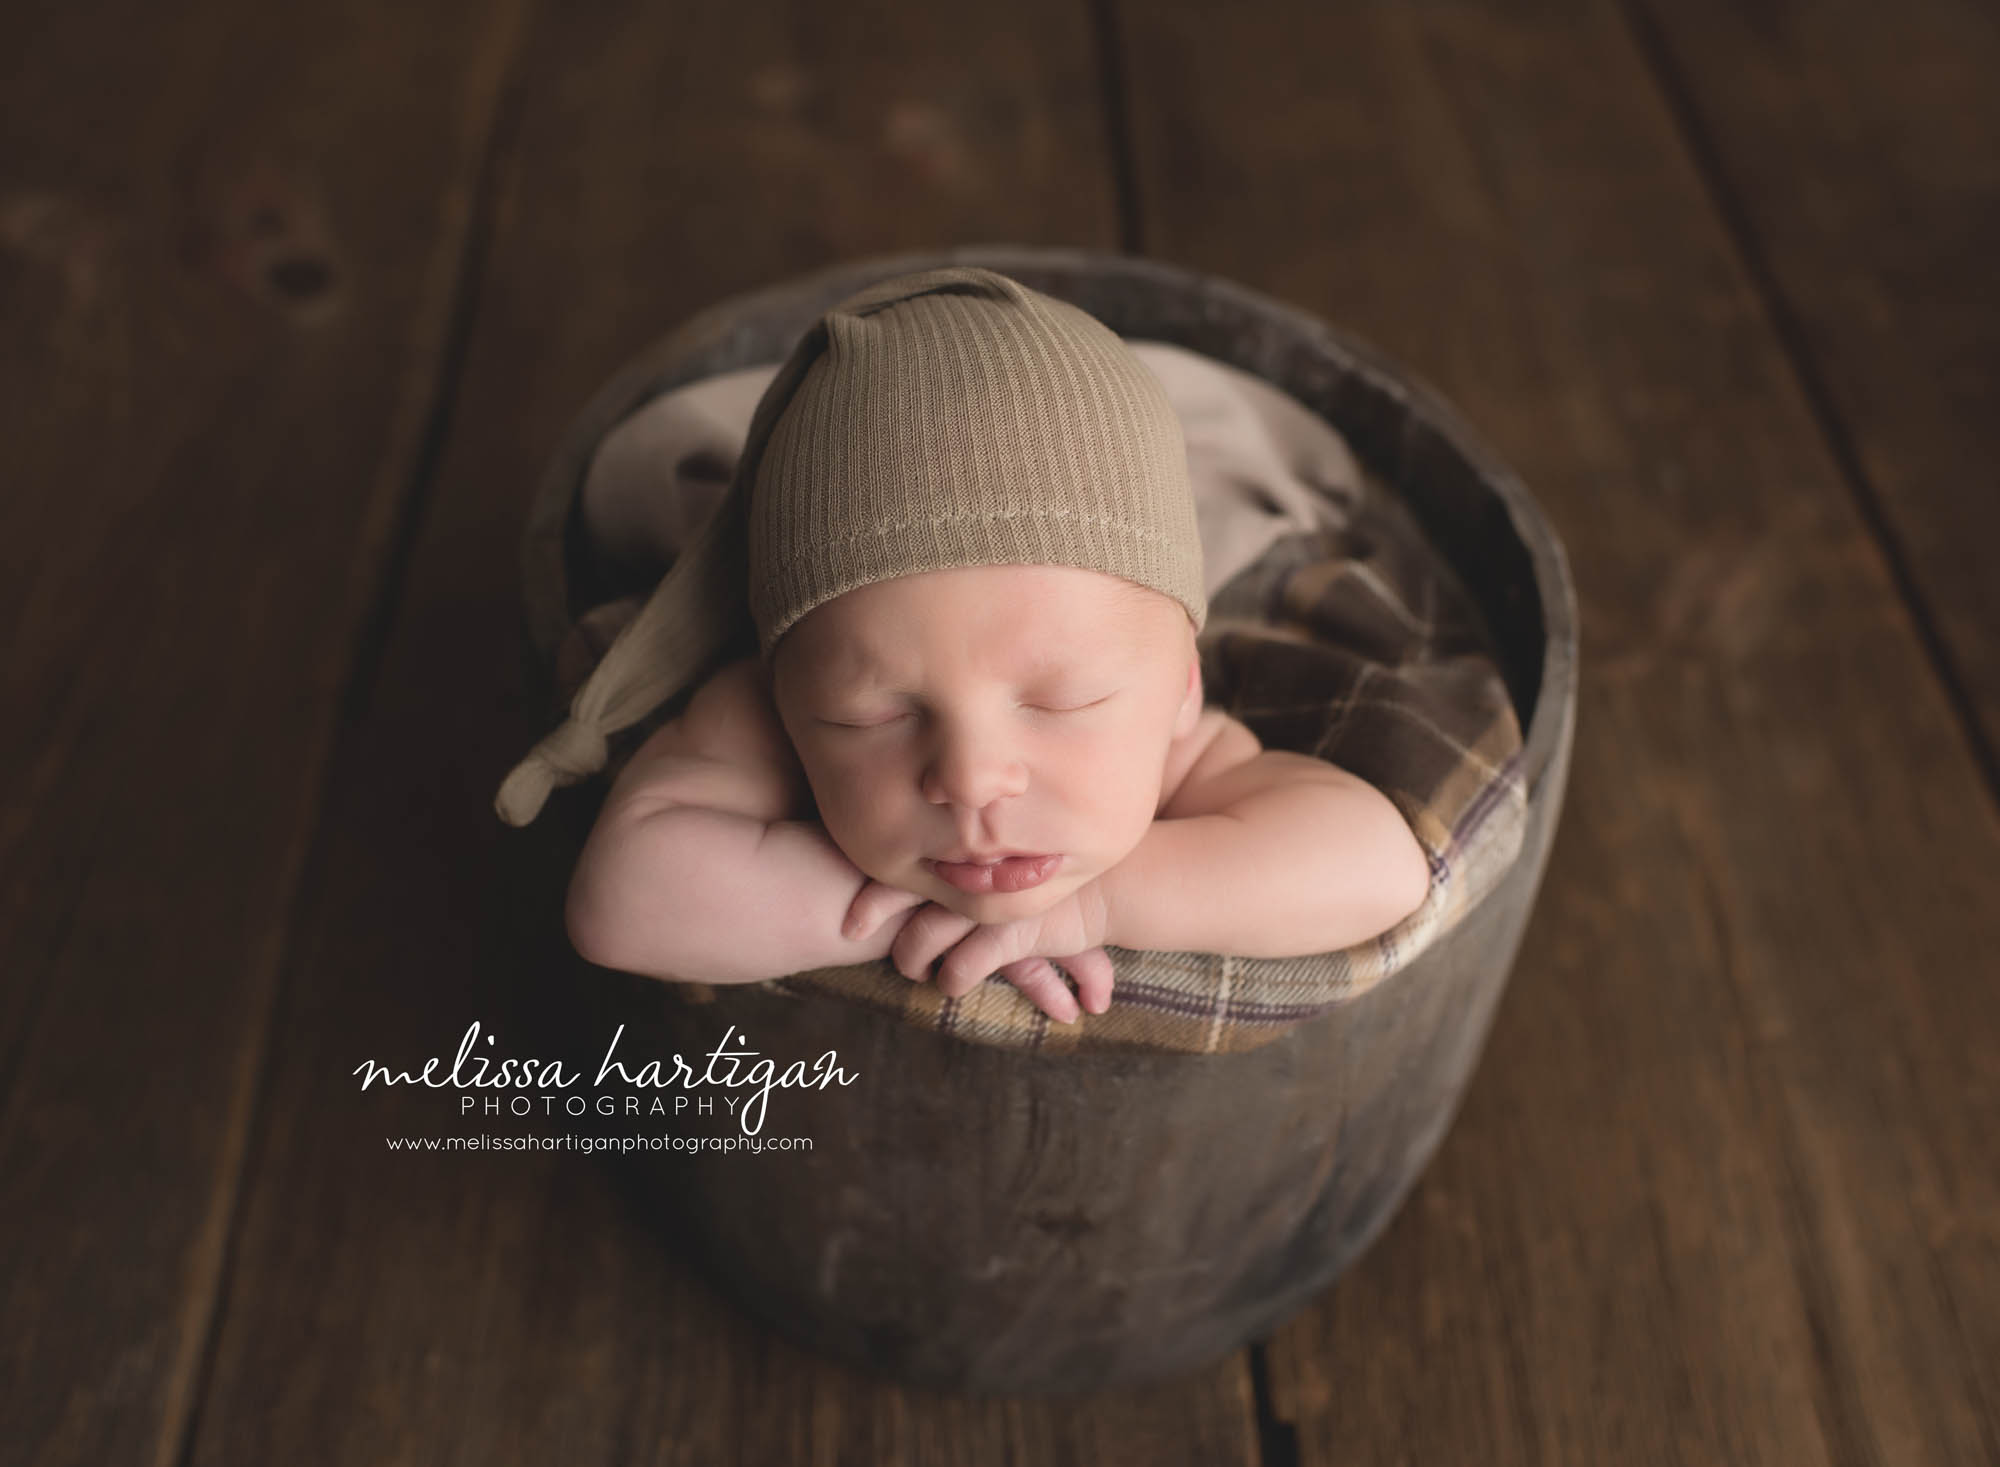 CT Baby Photography newborn boy sleeping in wooden bucket with tan knit hat